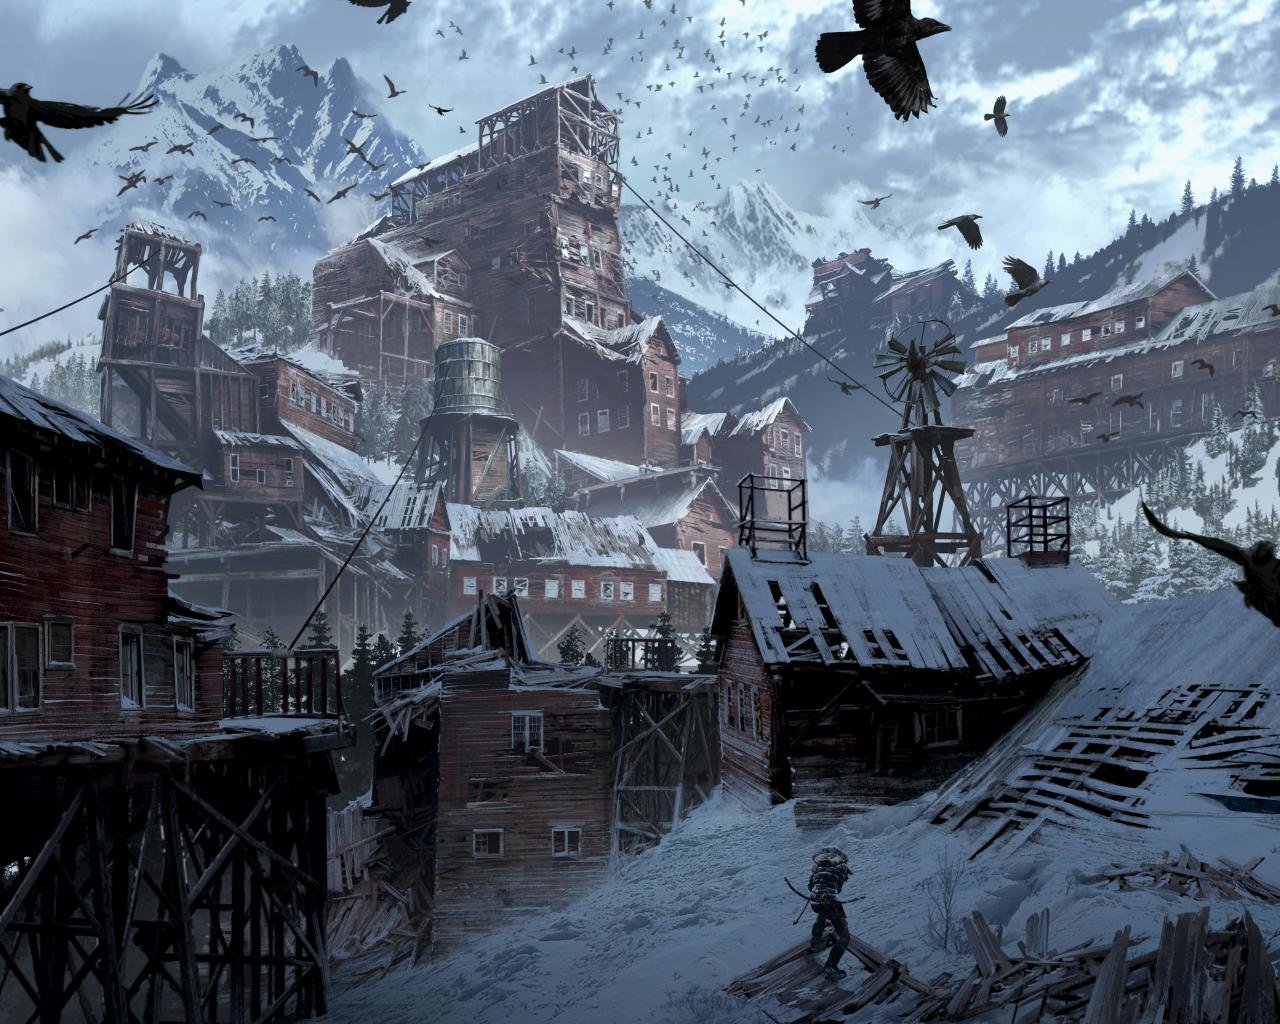 Best Rise Of The Tomb Raider background ID:83946 for High Resolution hd 1280x1024 desktop